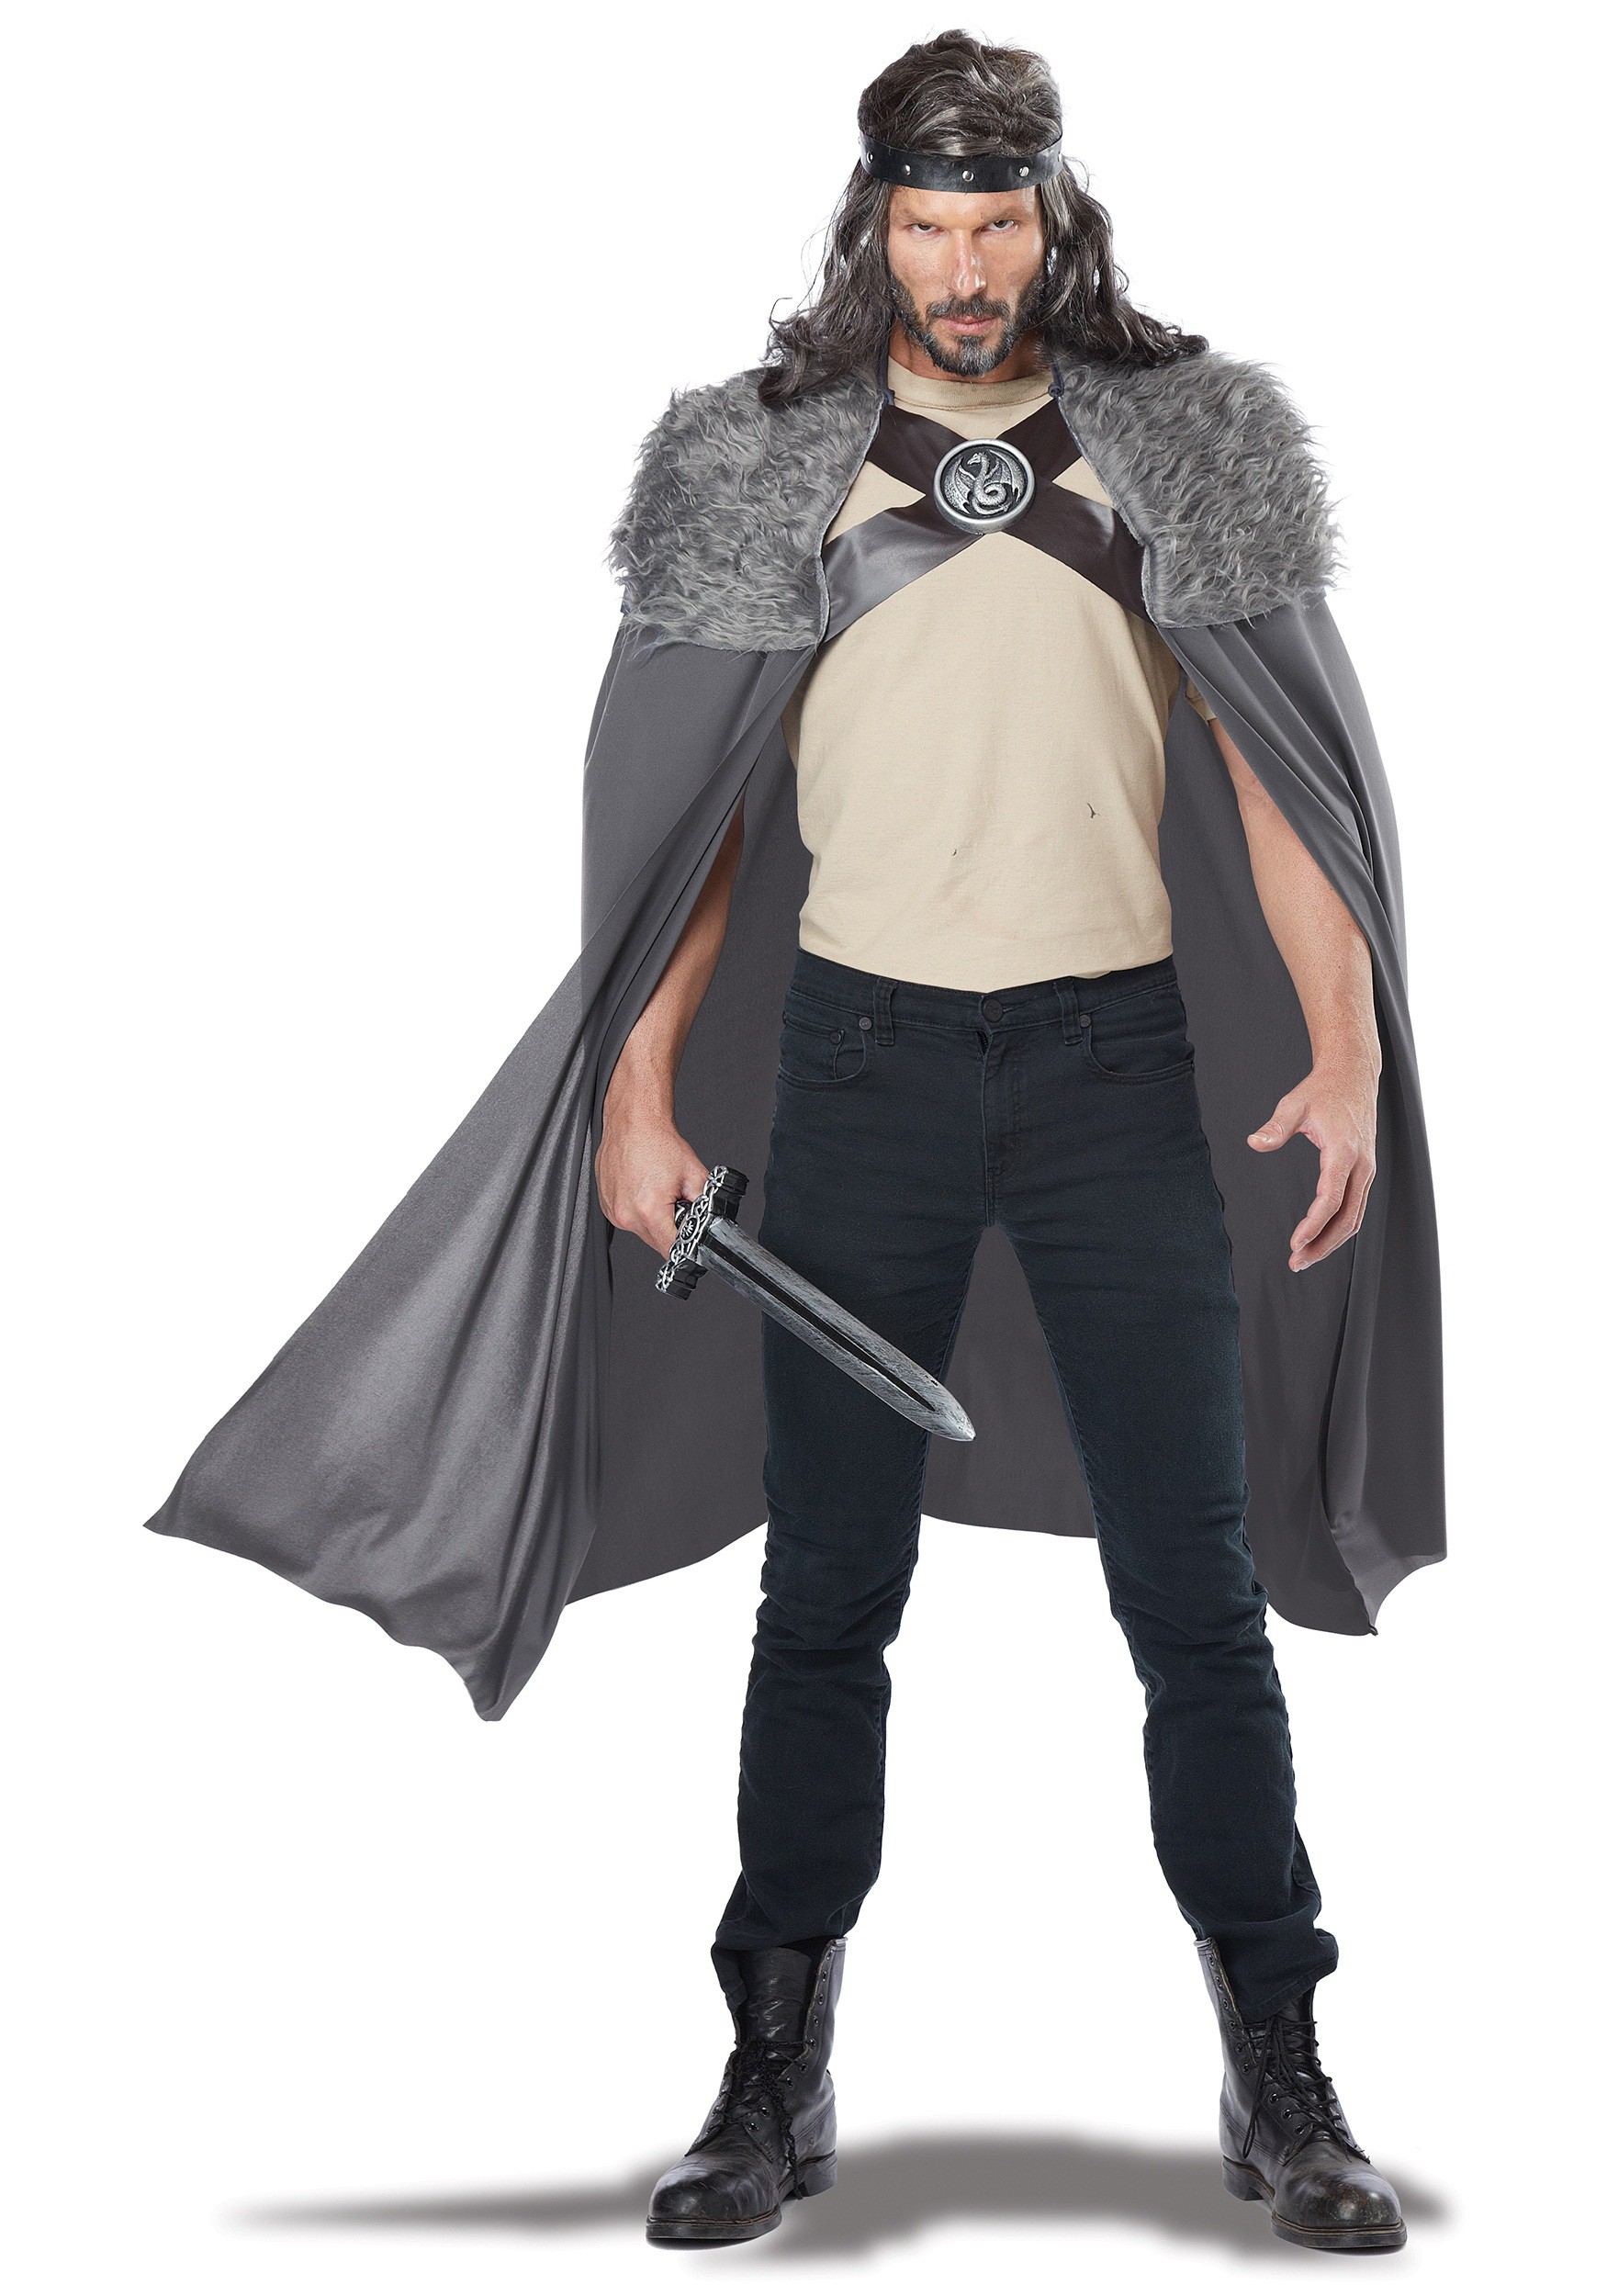 Dragon Master Cape for Adults